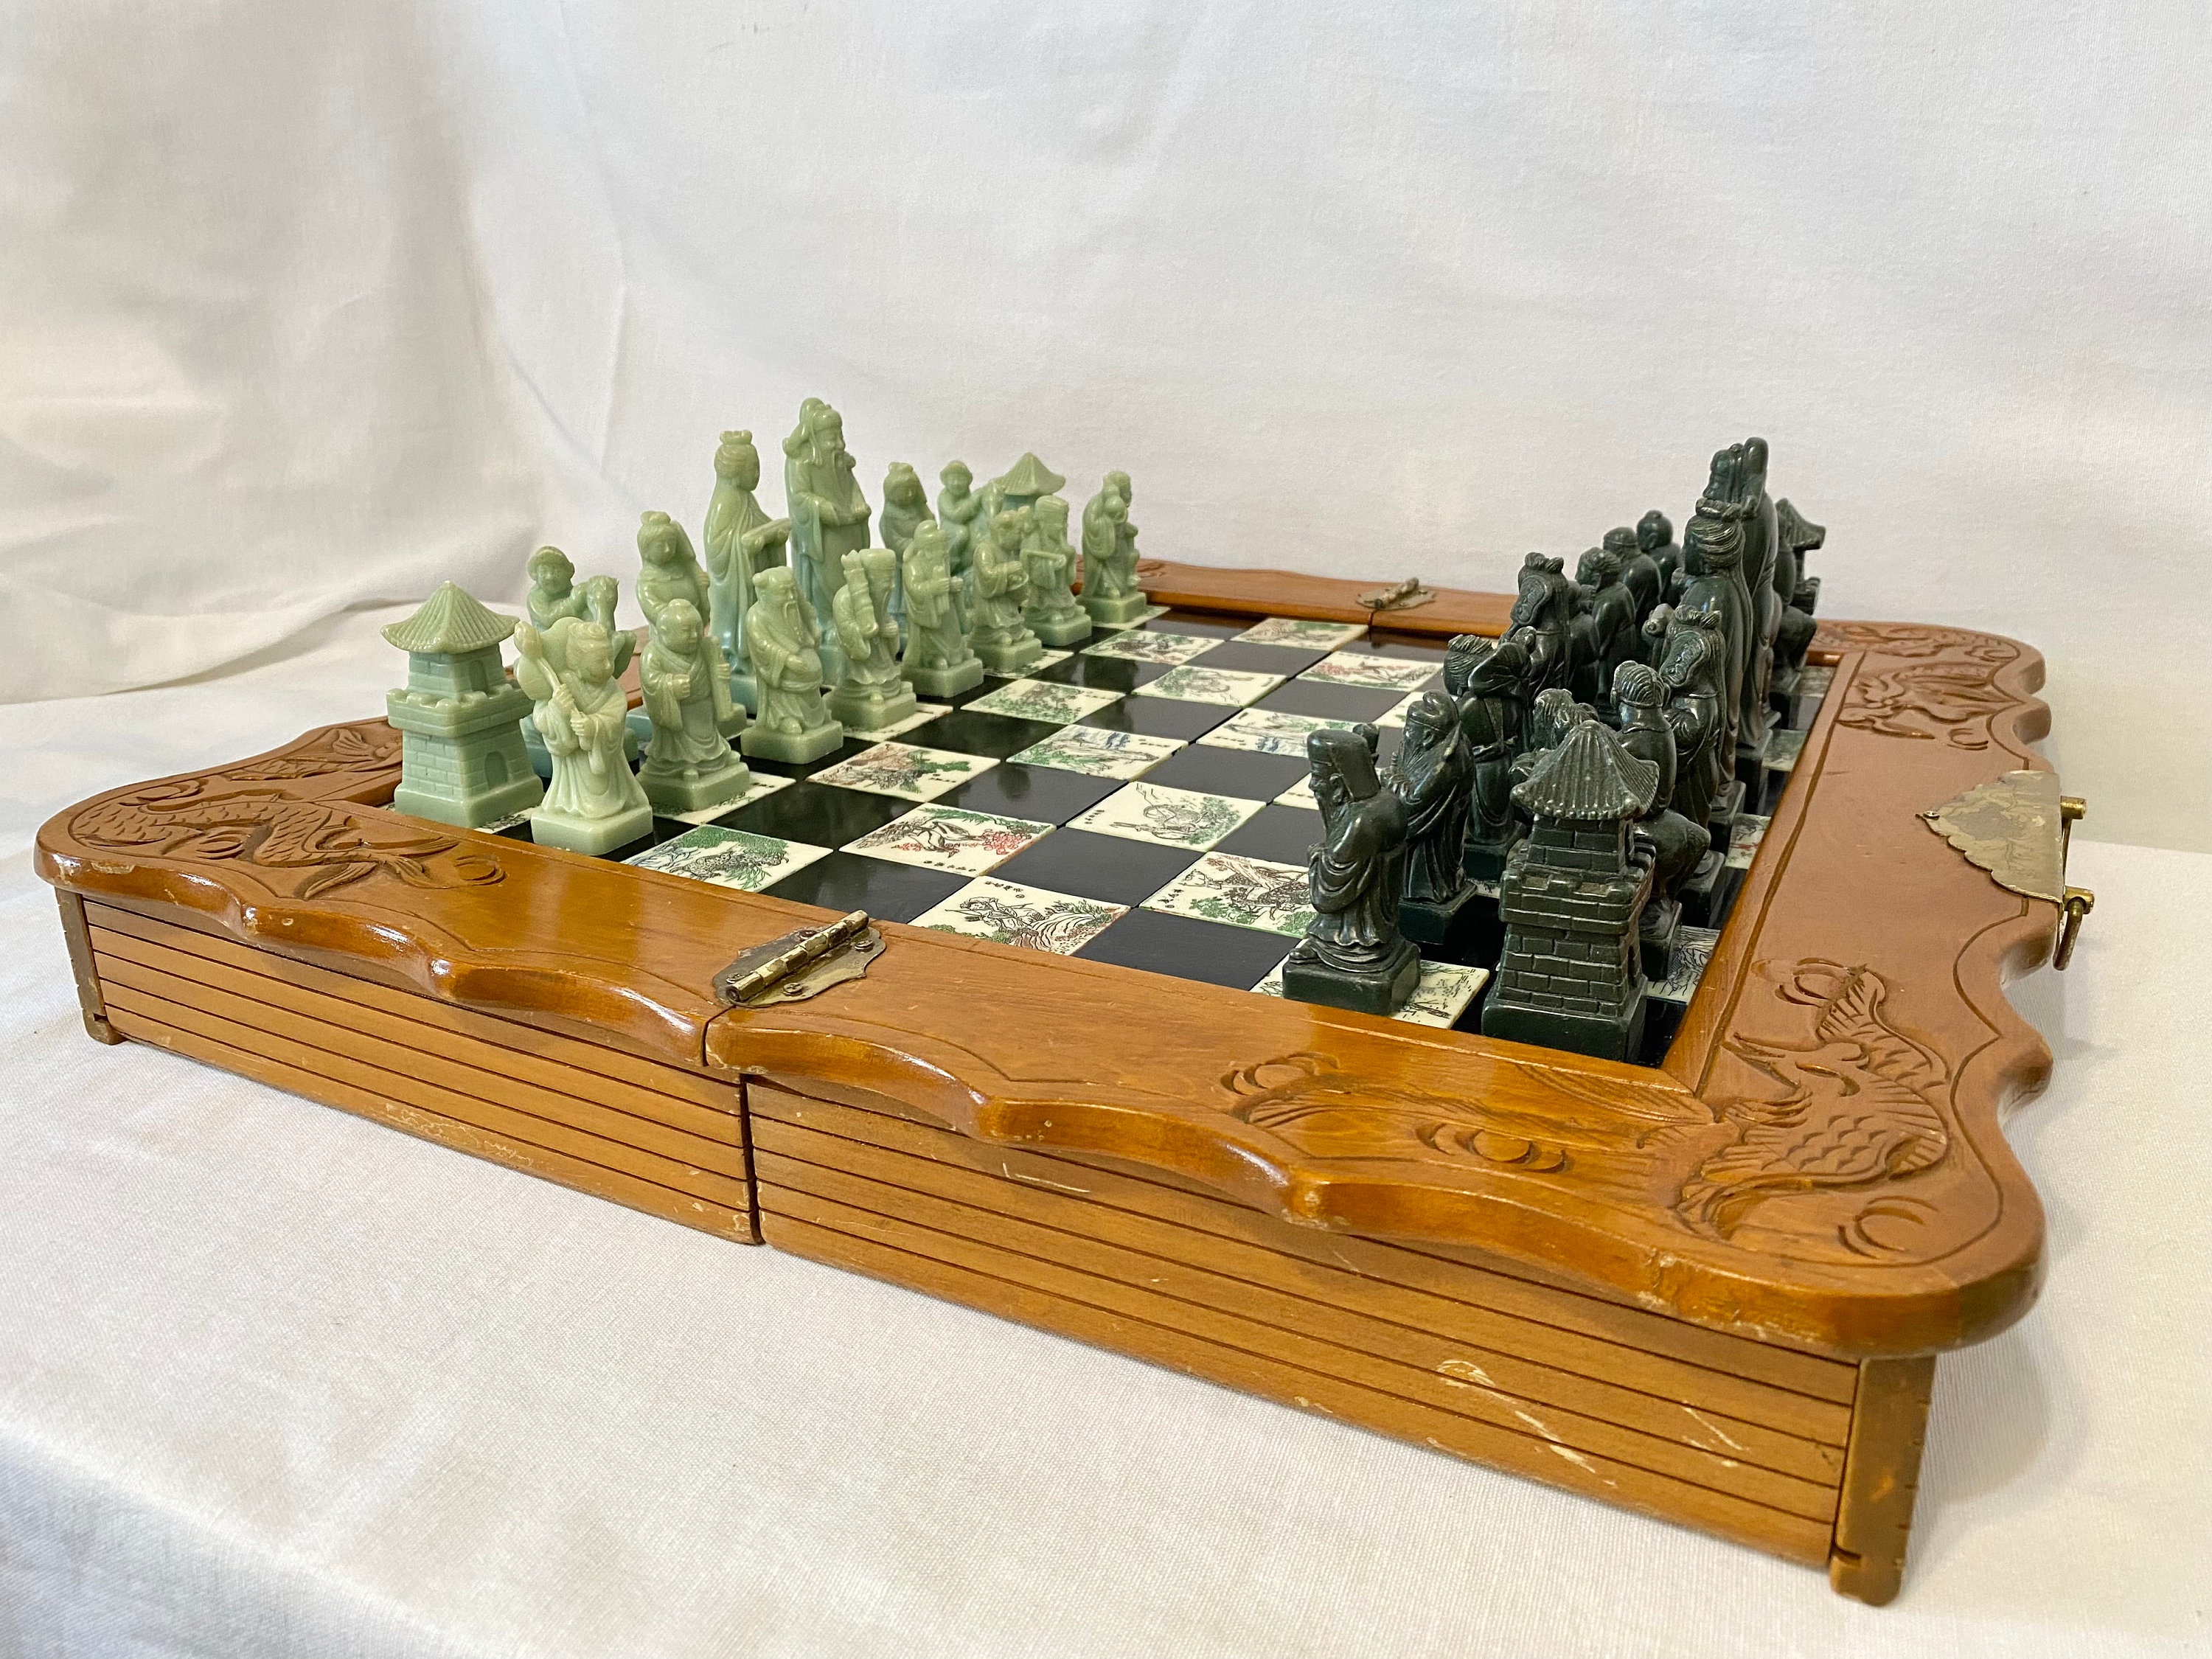 Red Display Case Chinese Dynasty Chess Set Large 18'x19' Foldable Chess Board 